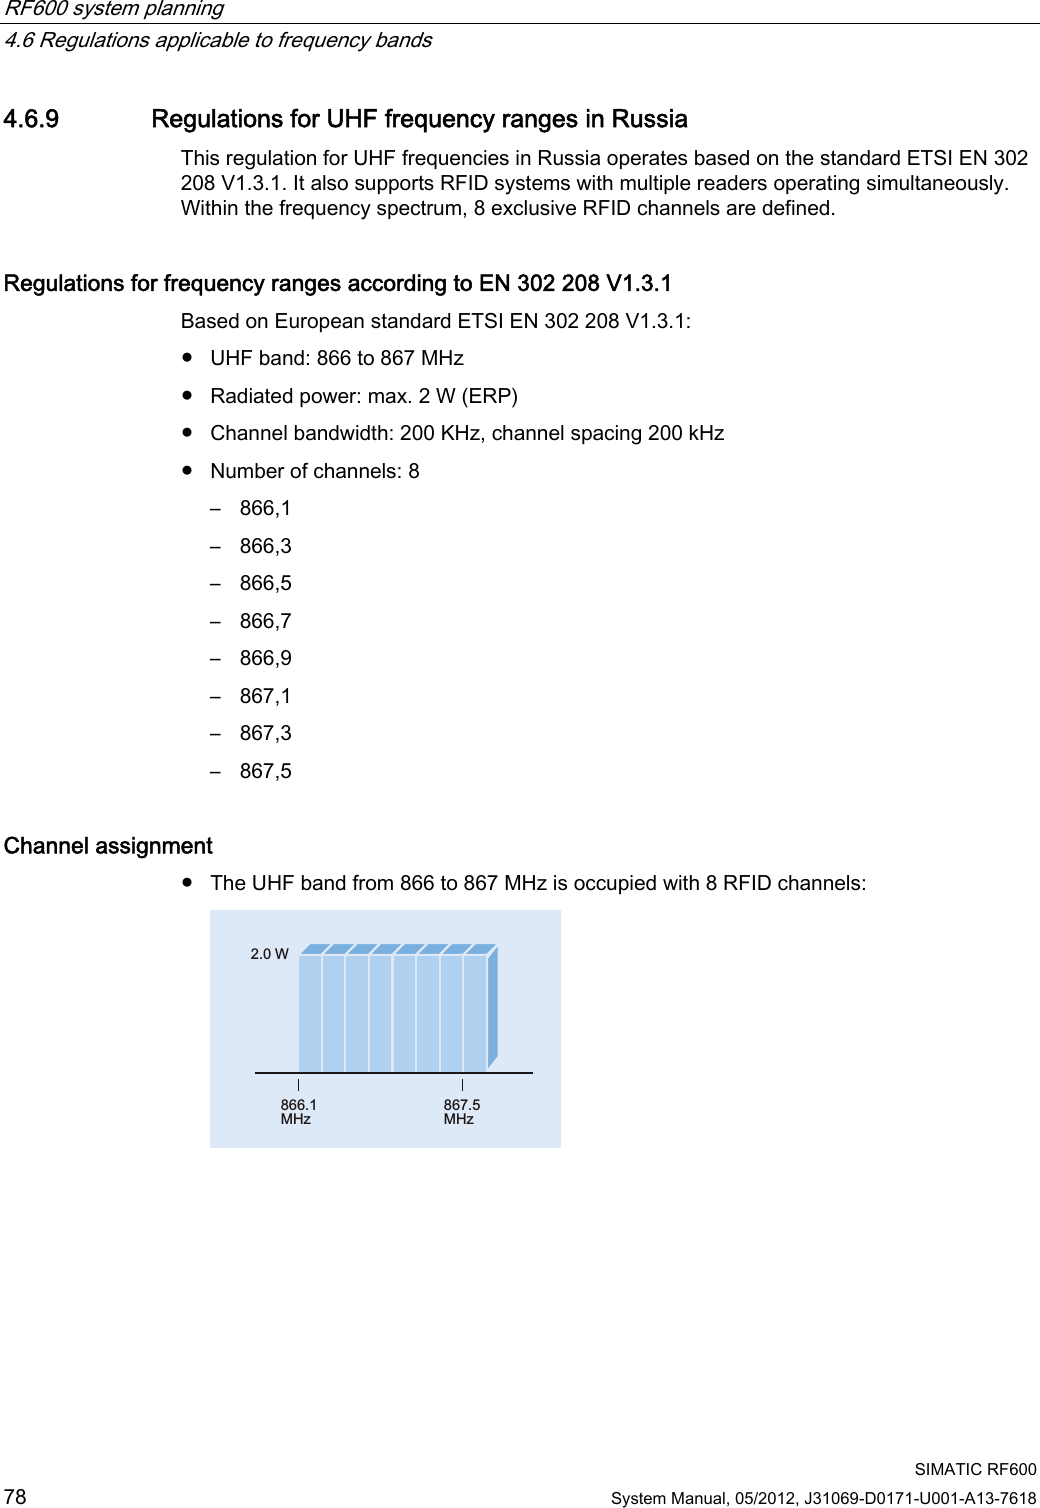 RF600 system planning   4.6 Regulations applicable to frequency bands  SIMATIC RF600 78 System Manual, 05/2012, J31069-D0171-U001-A13-7618 4.6.9 Regulations for UHF frequency ranges in Russia This regulation for UHF frequencies in Russia operates based on the standard ETSI EN 302 208 V1.3.1. It also supports RFID systems with multiple readers operating simultaneously. Within the frequency spectrum, 8 exclusive RFID channels are defined. Regulations for frequency ranges according to EN 302 208 V1.3.1   Based on European standard ETSI EN 302 208 V1.3.1: ●  UHF band: 866 to 867 MHz ●  Radiated power: max. 2 W (ERP) ●  Channel bandwidth: 200 KHz, channel spacing 200 kHz ●  Number of channels: 8 –  866,1 –  866,3 –  866,5 –  866,7 –  866,9 –  867,1 –  867,3 –  867,5 Channel assignment ●  The UHF band from 866 to 867 MHz is occupied with 8 RFID channels: :0+]0+] 